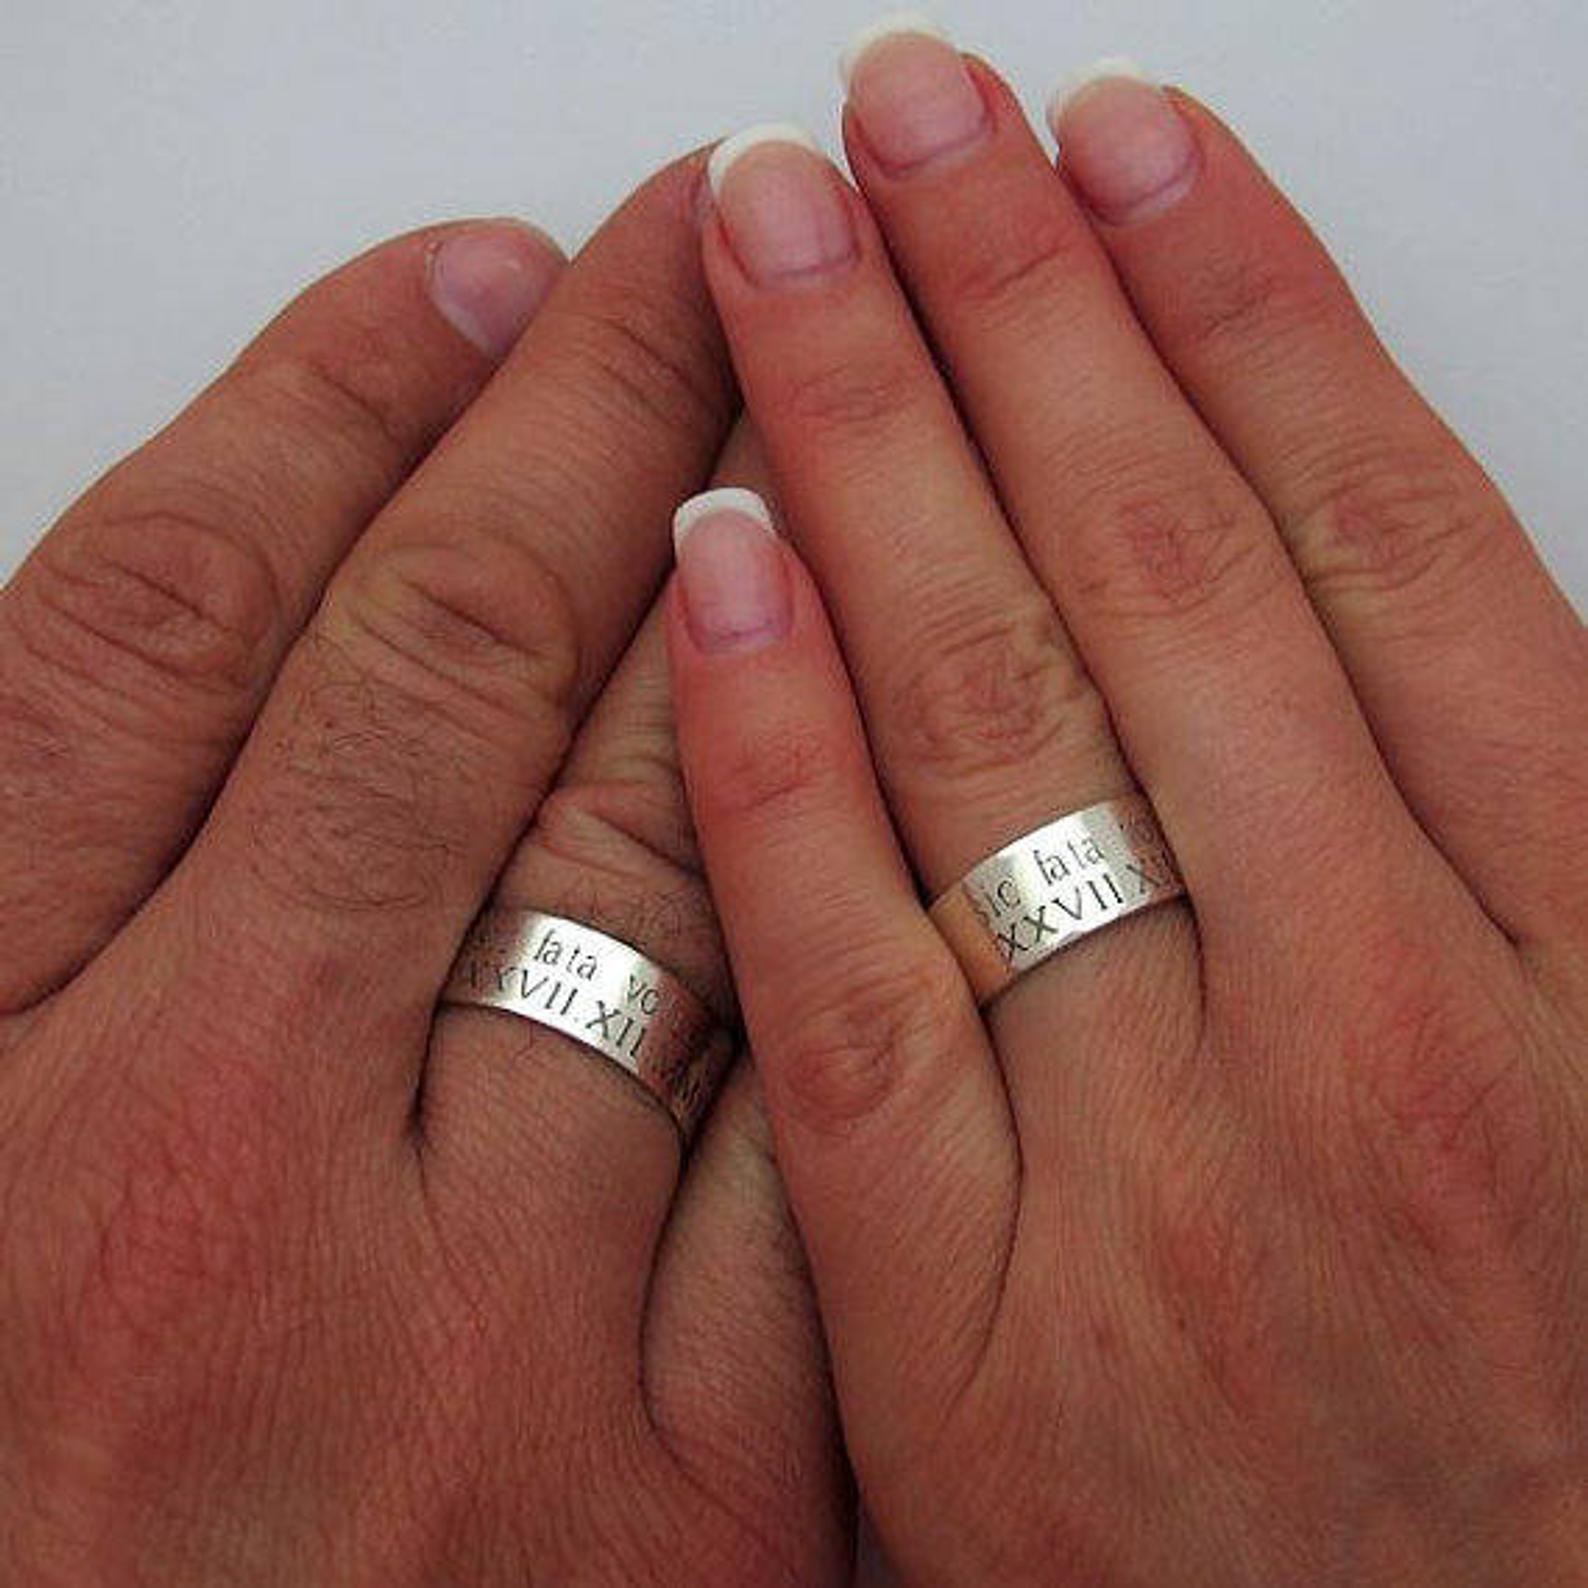 Bandmax Personalized Ring for Women Men, Any Text Customizable Stainless  Steel Rings with Old English Letter Engaved Custom Rings for Couple Wedding  Rings Engagement Rings Custom Jewelry for Gift|Amazon.com